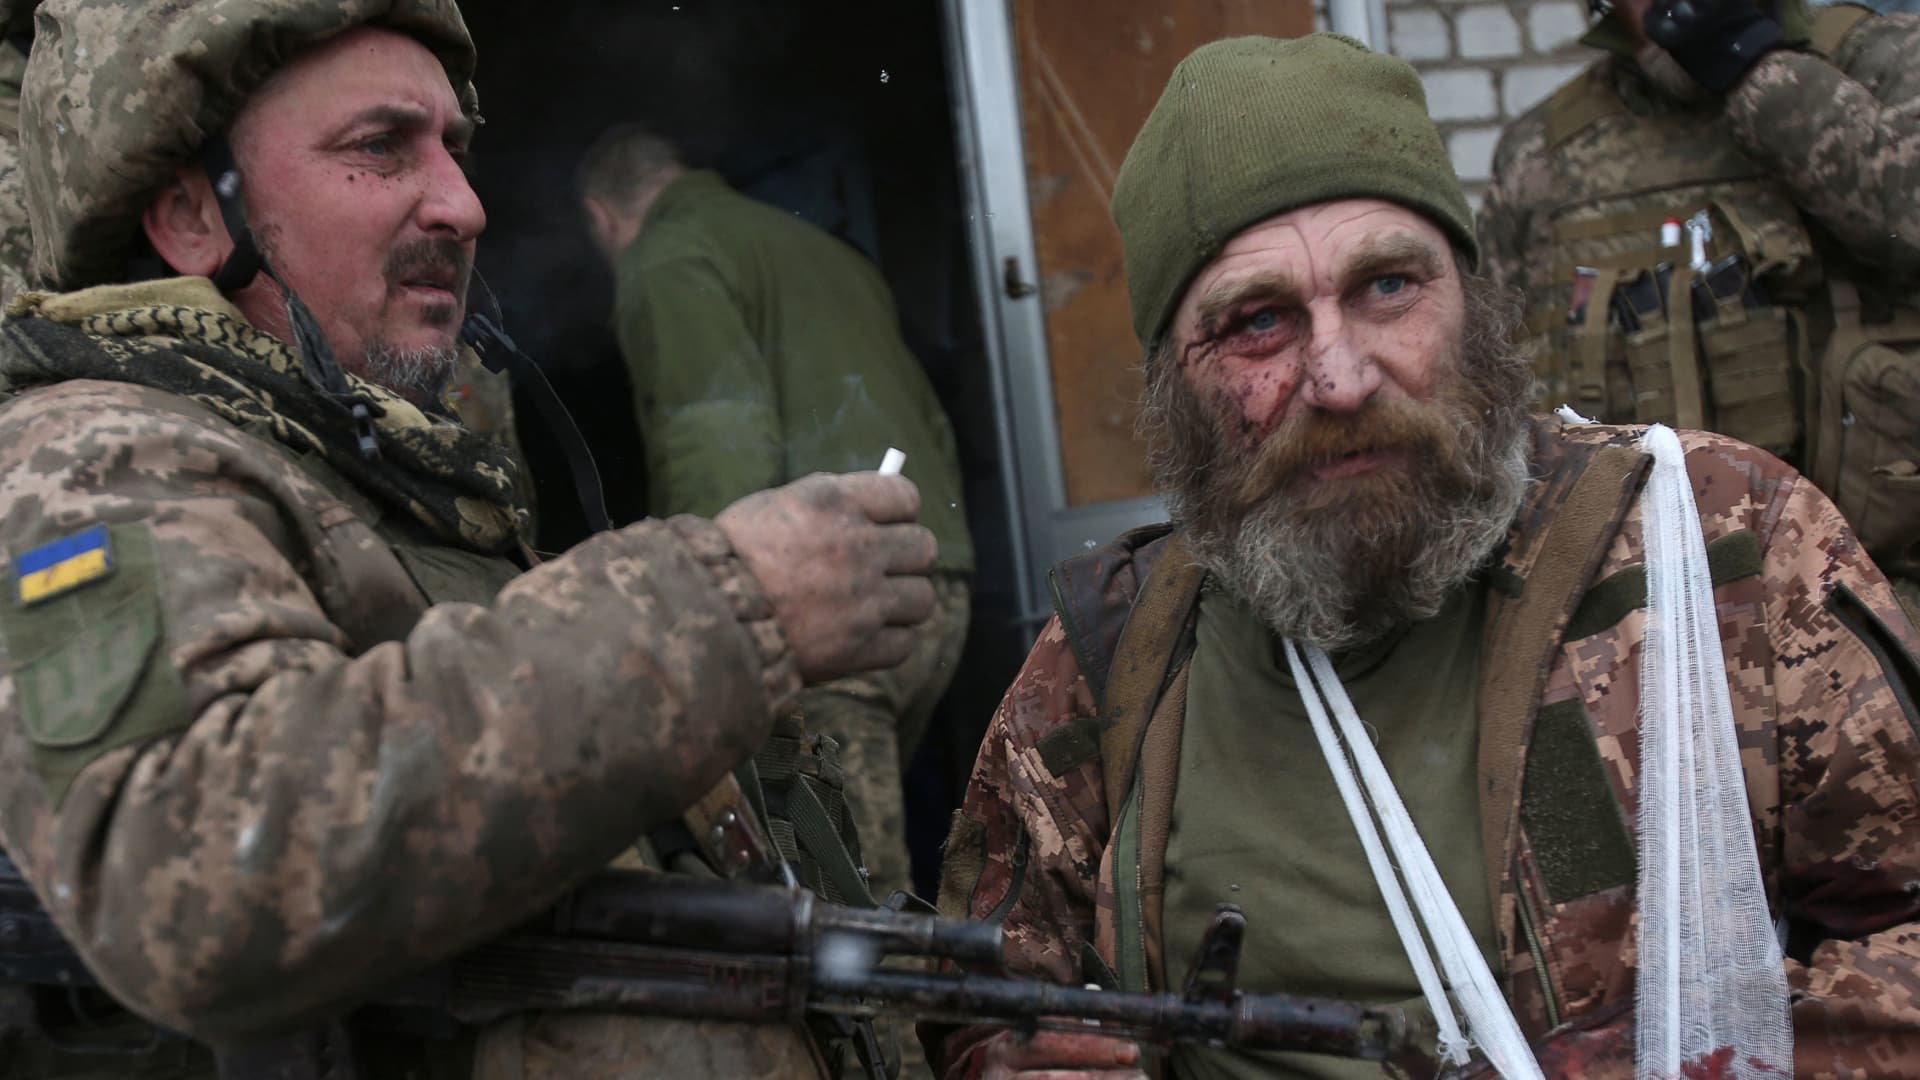 A wounded servicemen of Ukrainian Military Forces looks on after the battle with Russian troops and Russia-backed separatists in Lugansk region on March 8, 2022.